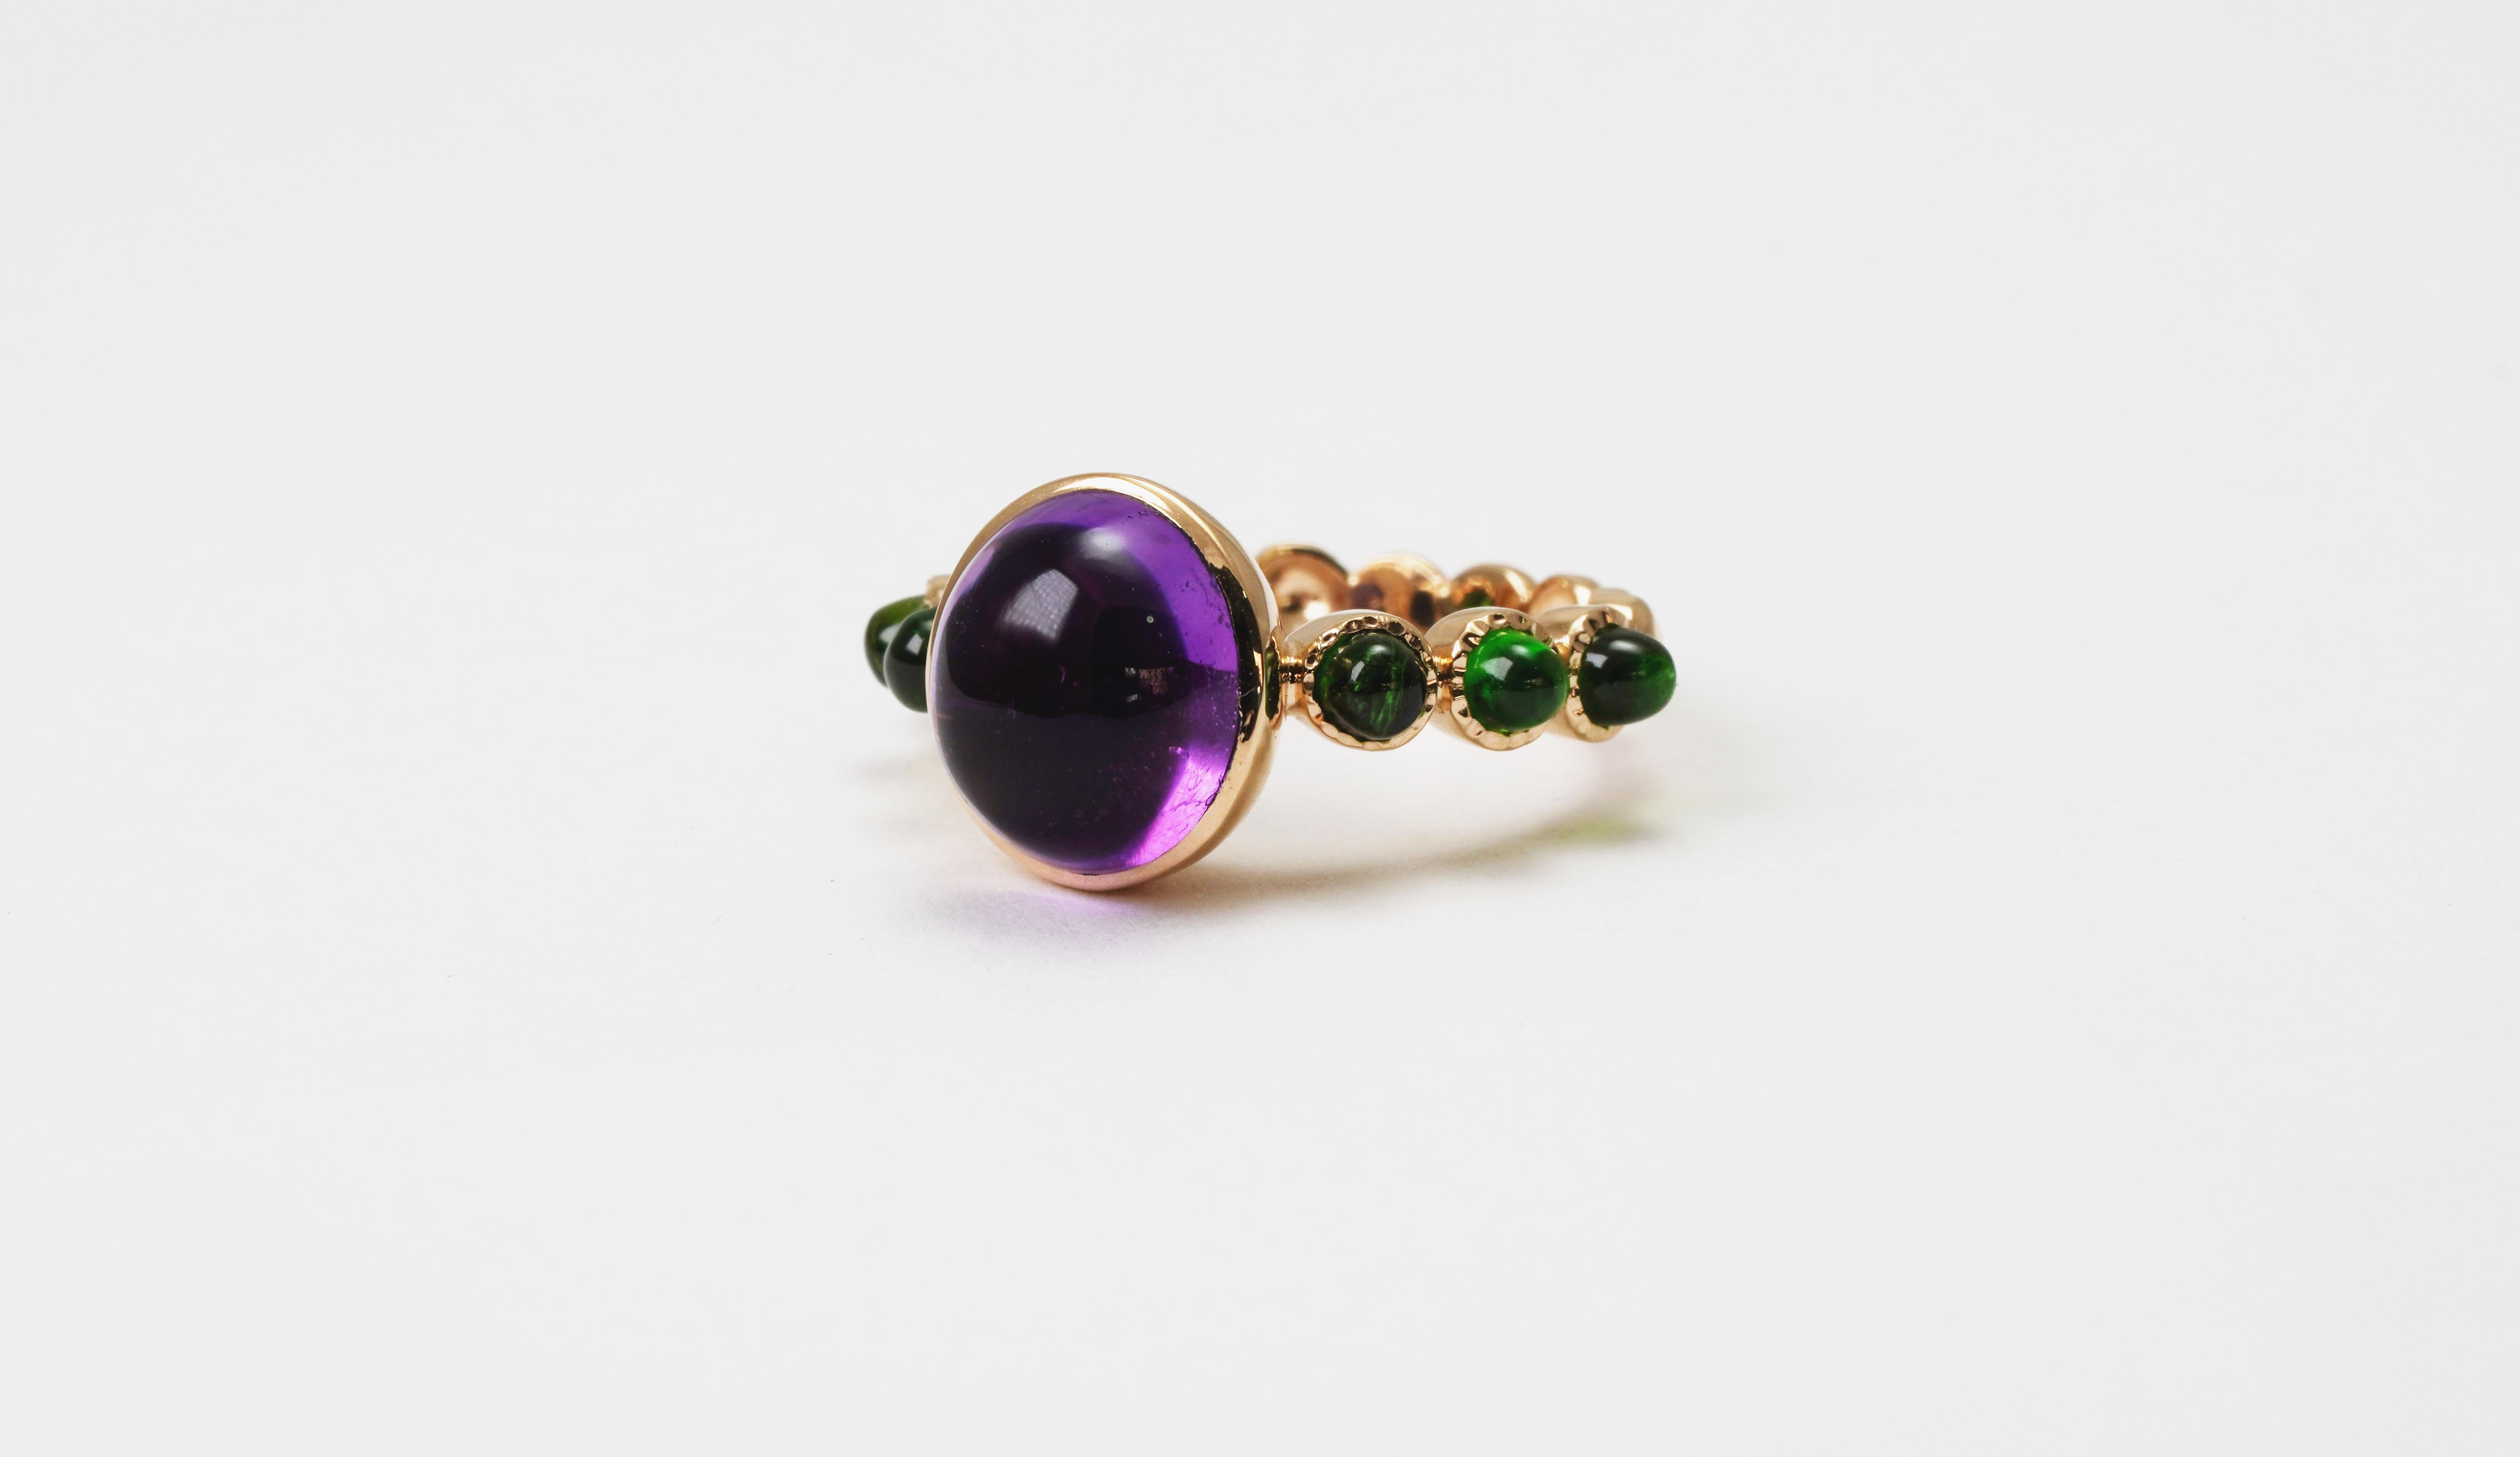 Cabochon 4.69 Carat Amethyst Diopside Cocktail Ring For Sale